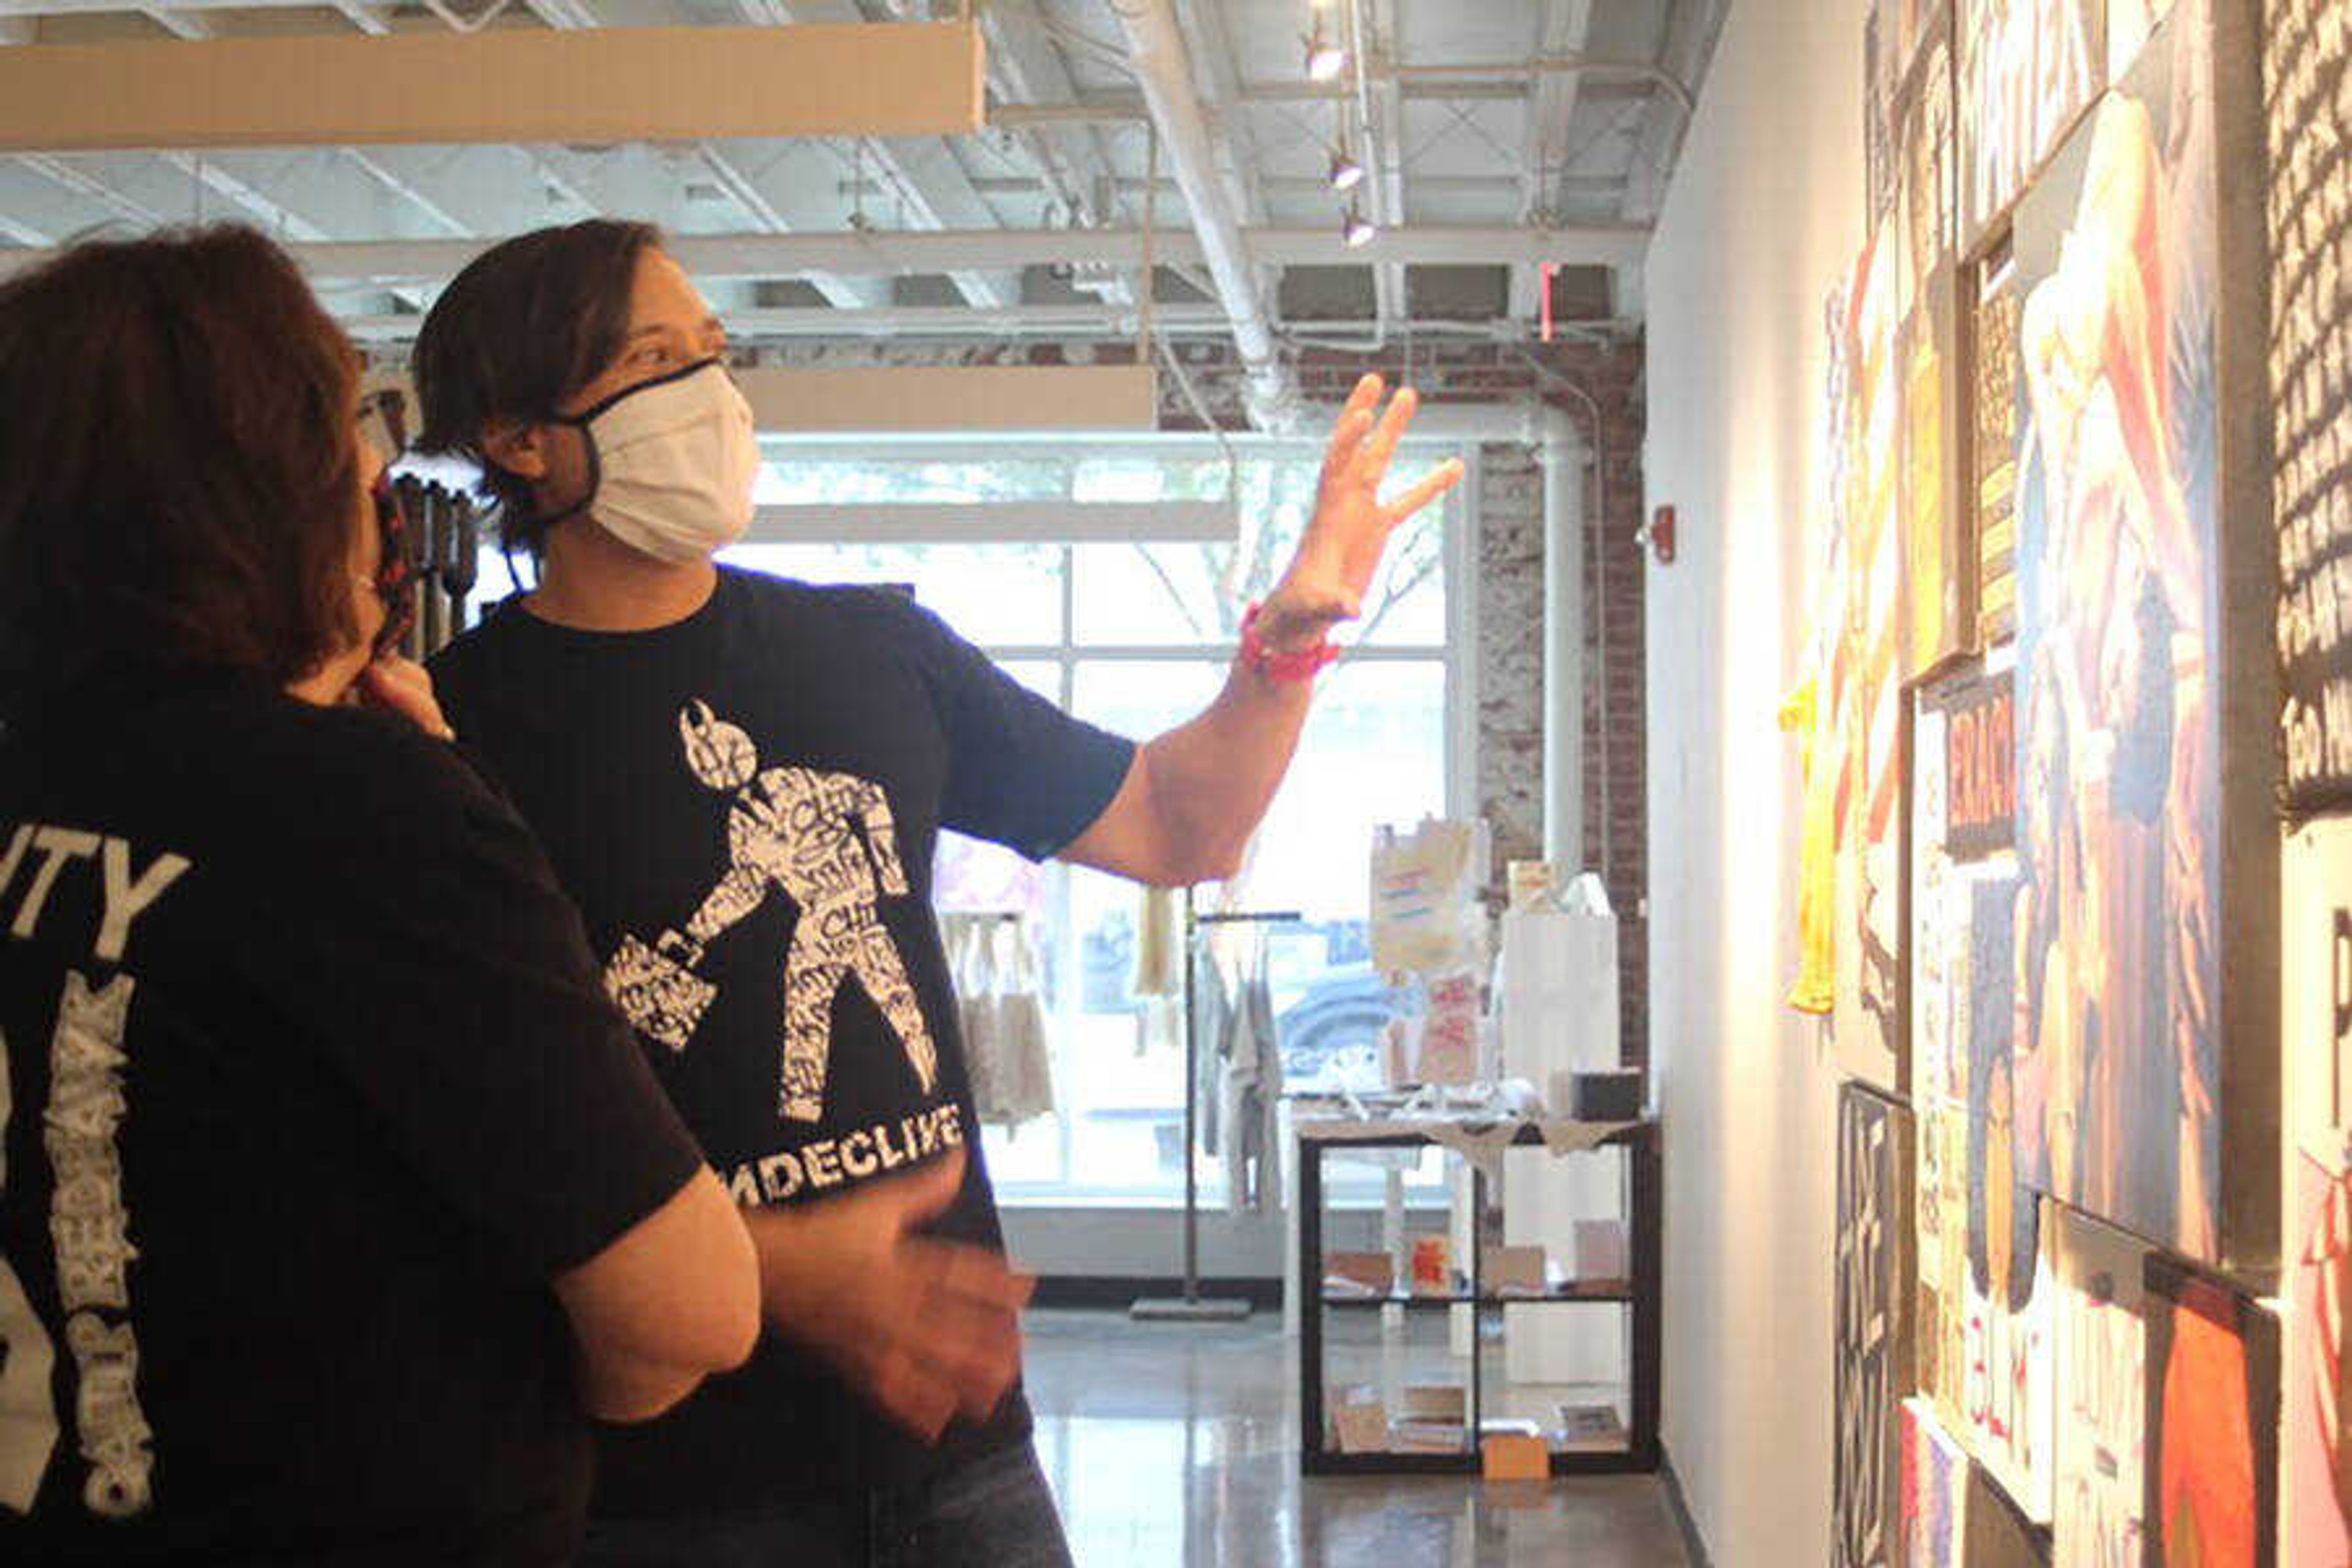 Professor Benjie Heu speaks about the Black Lives Matter exhibit with Rhonda Weller-Stilson during the gallery opening on September 4. The gallery contains artwork from Southeast faculty and students, including four of Heu’s original pieces.